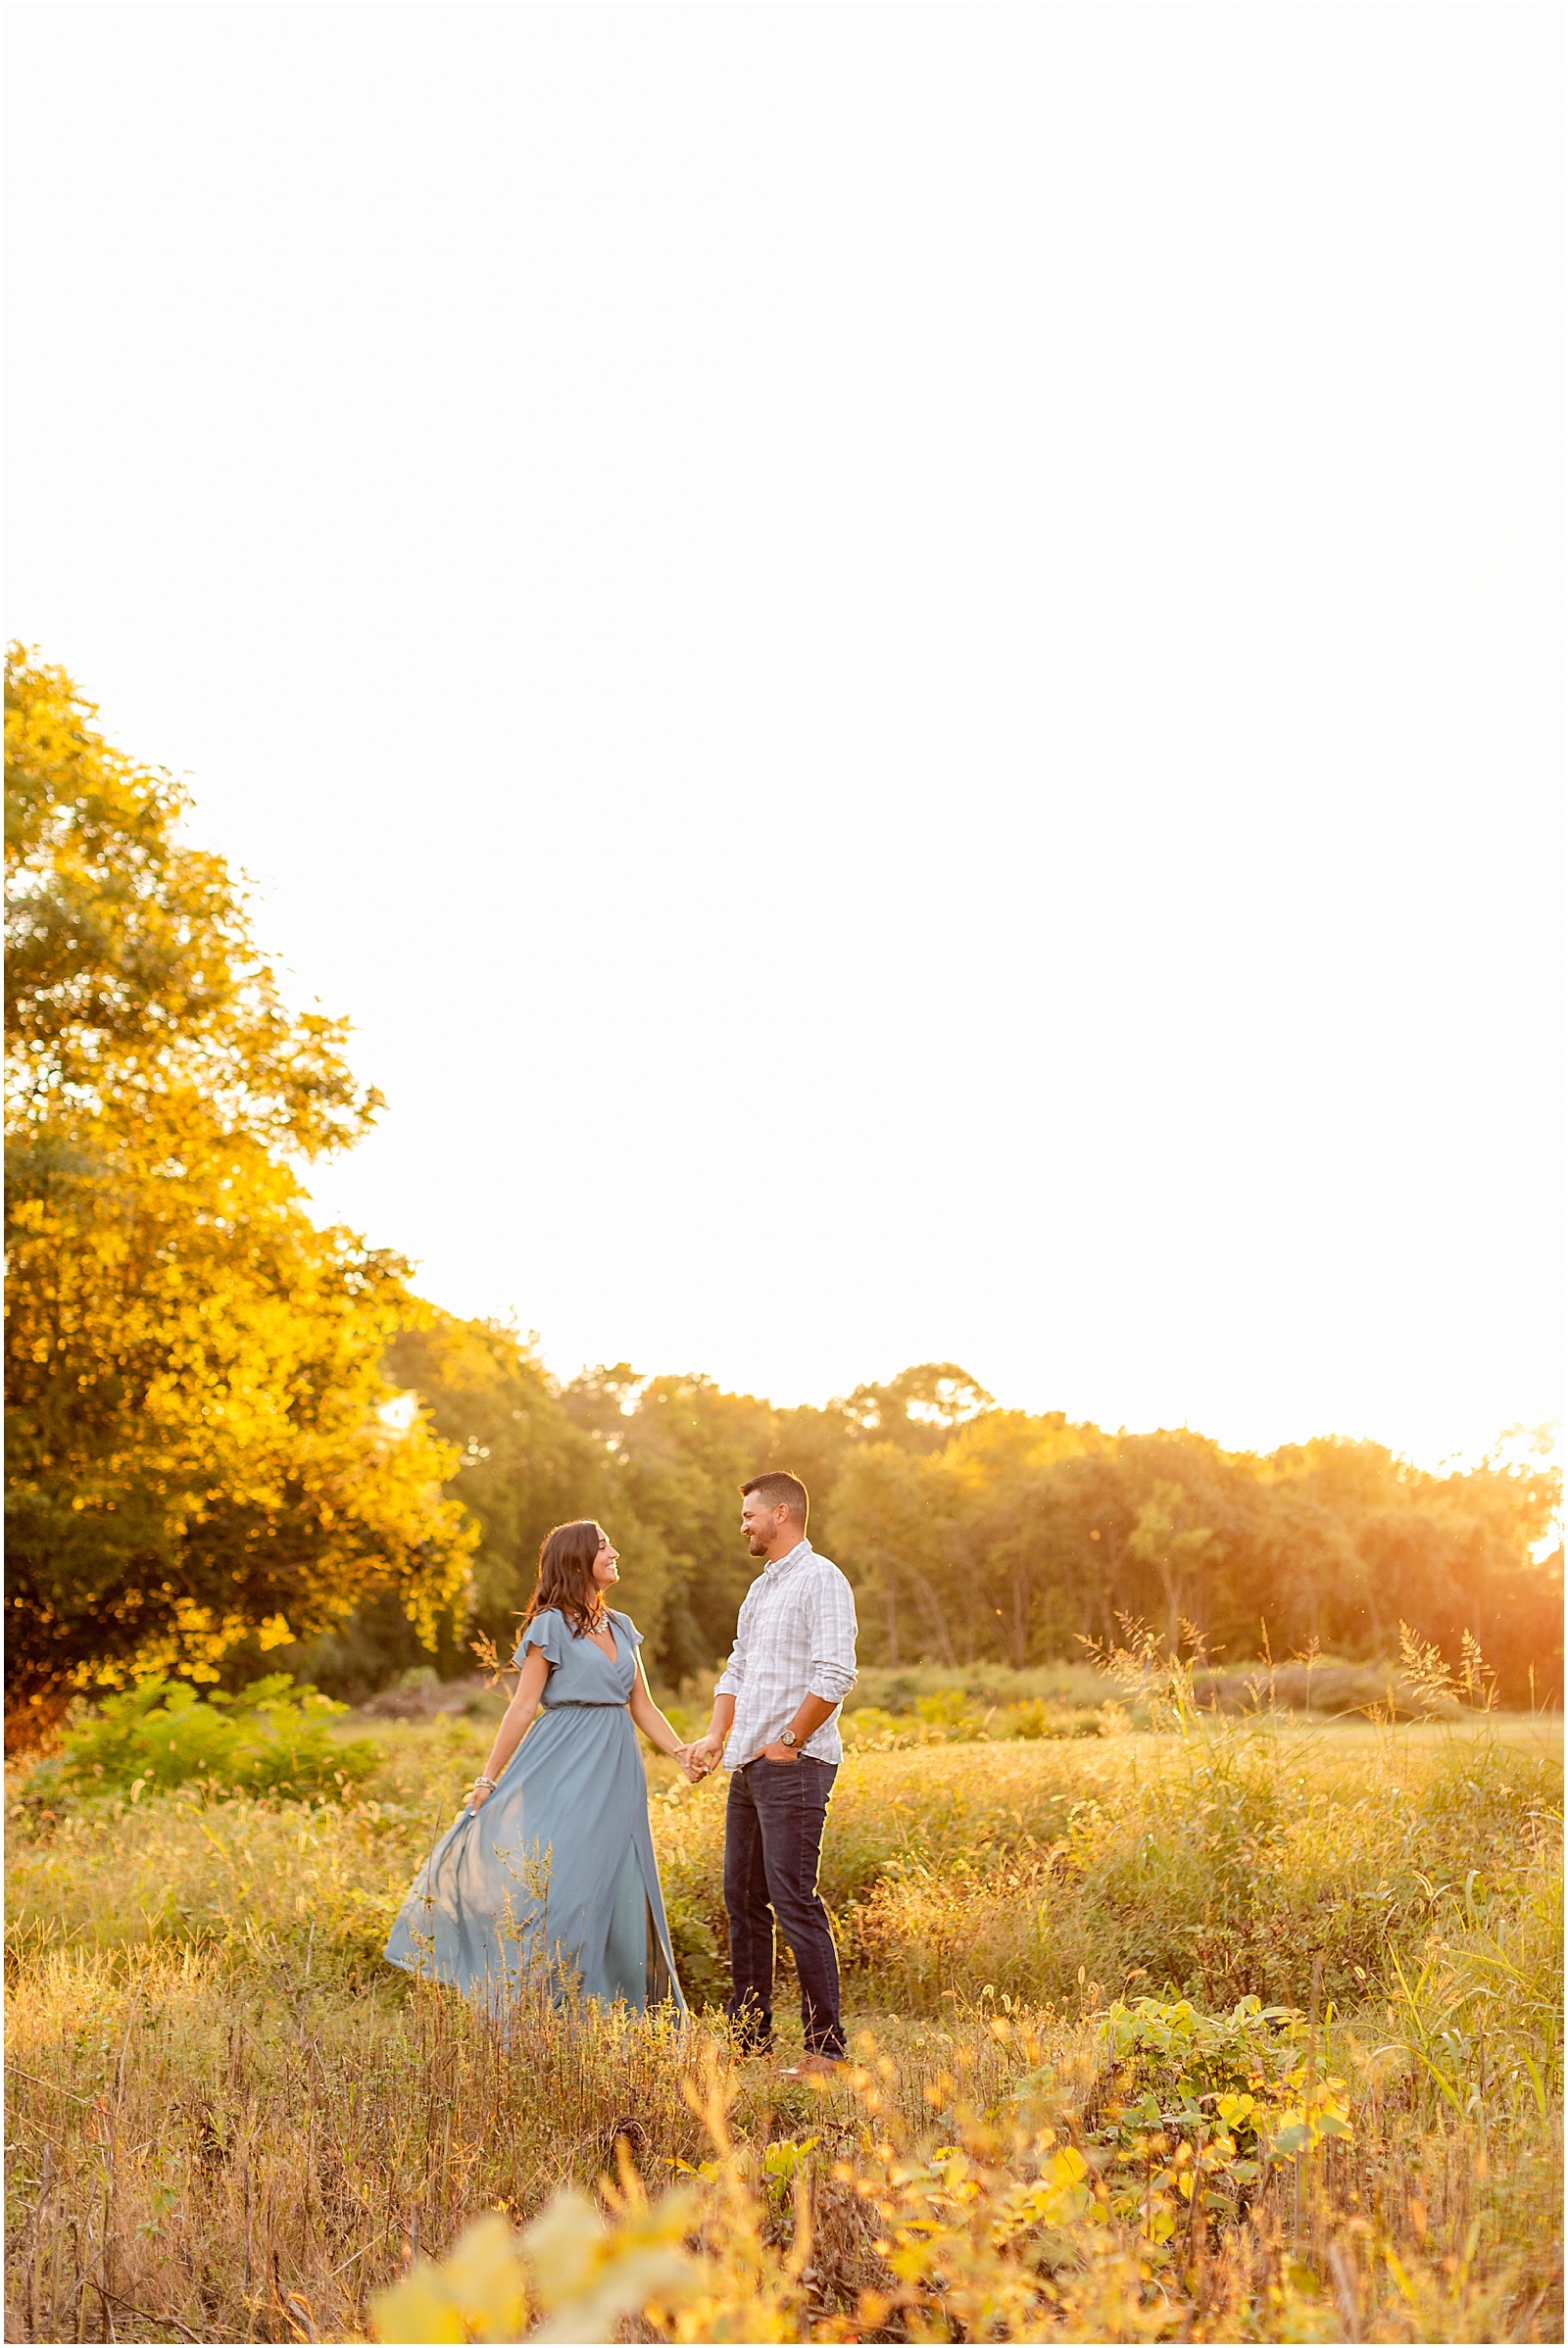 Sally and Andrew's Anniversary Session in New Harmony |Bret and Brandie Photography0021.jpg